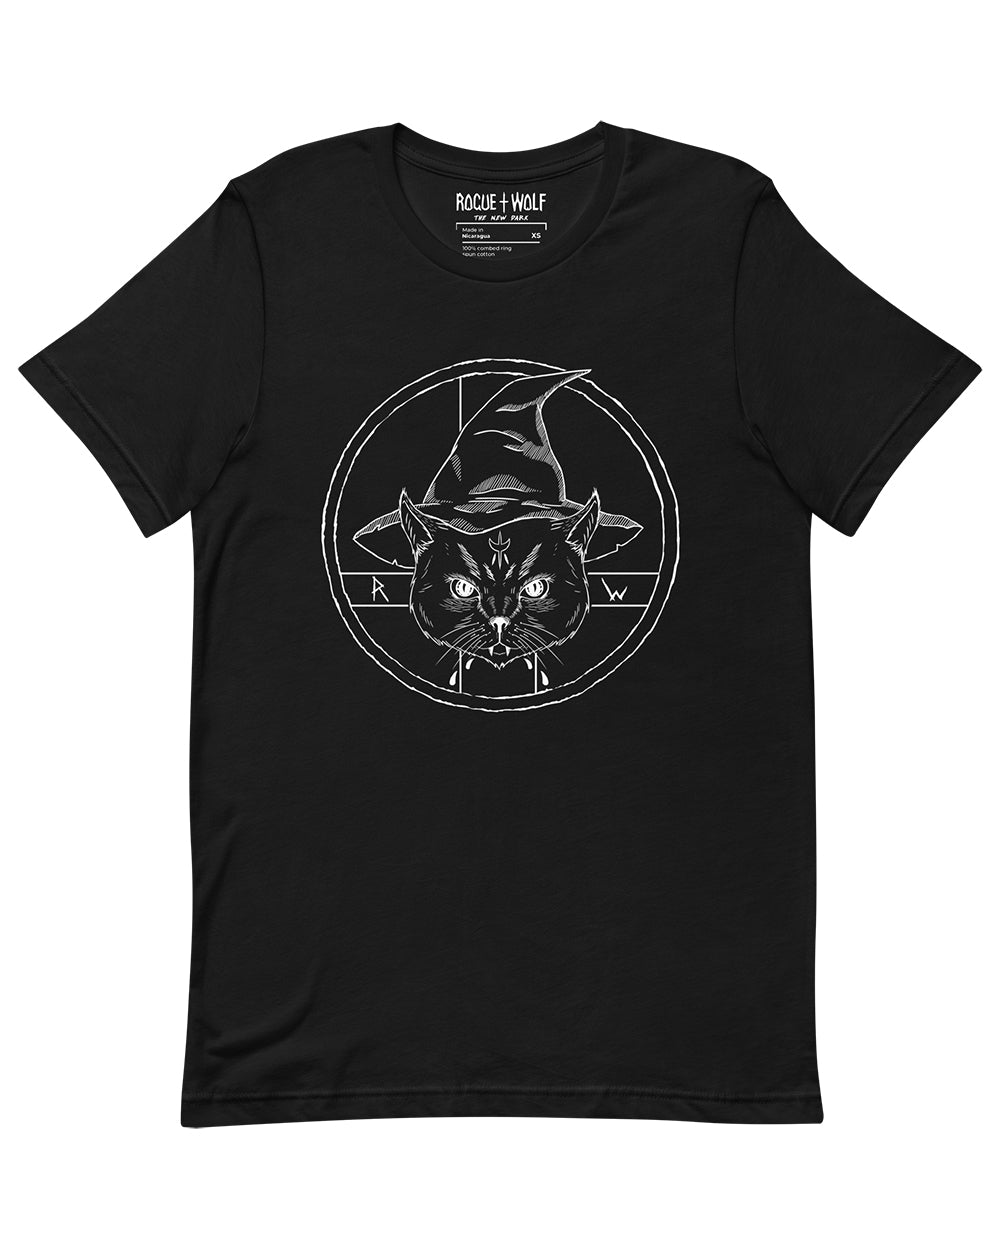 Purrfect Witchery Tee - Unisex Vegan T-Shirt Dark Academia Gothic Style Witchy Clothing Occult Gift Cat Lovers